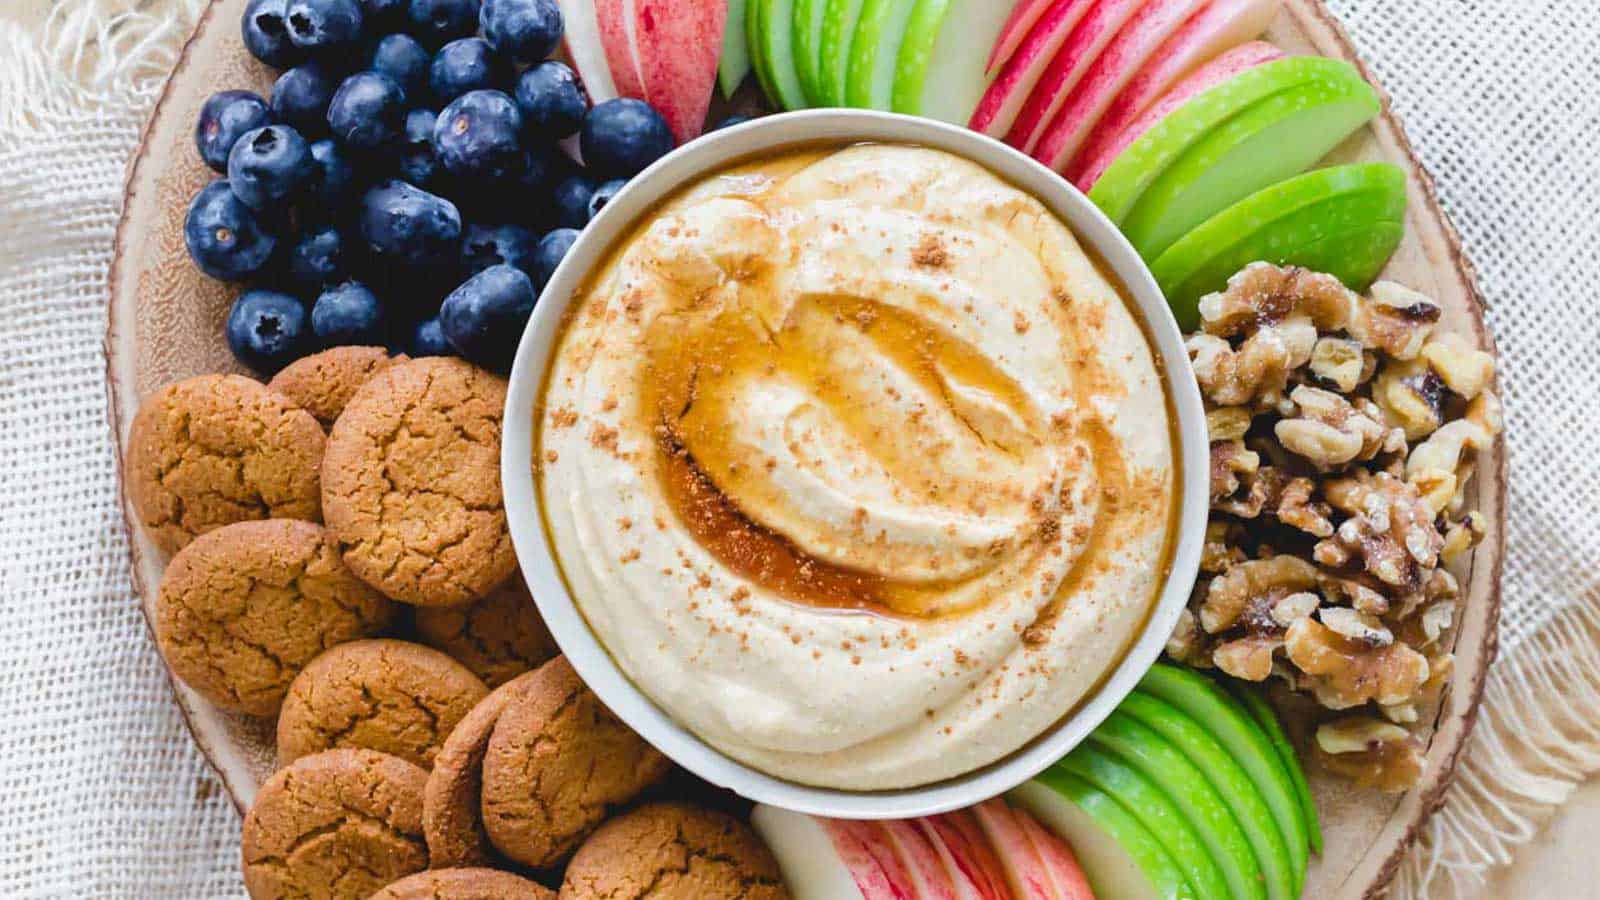 Whipped pumpkin ricotta dip on a wooden tray with cookies, walnuts and fruit.